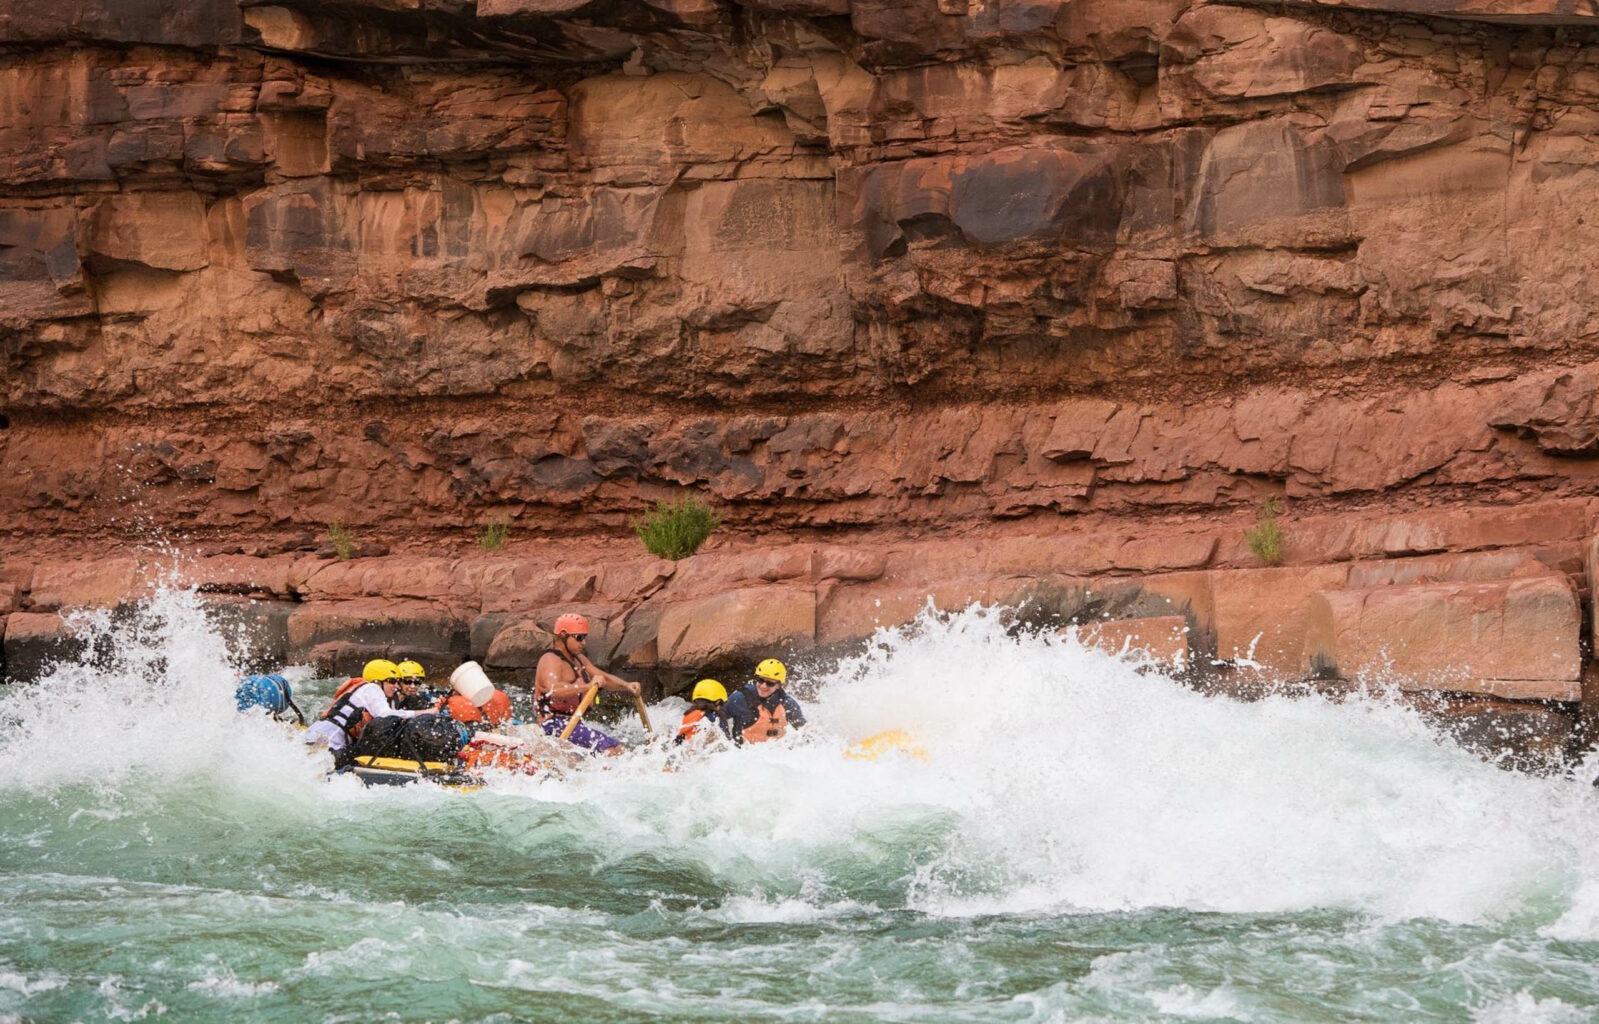 Group whitewater rafting through the Gerand Canyon.